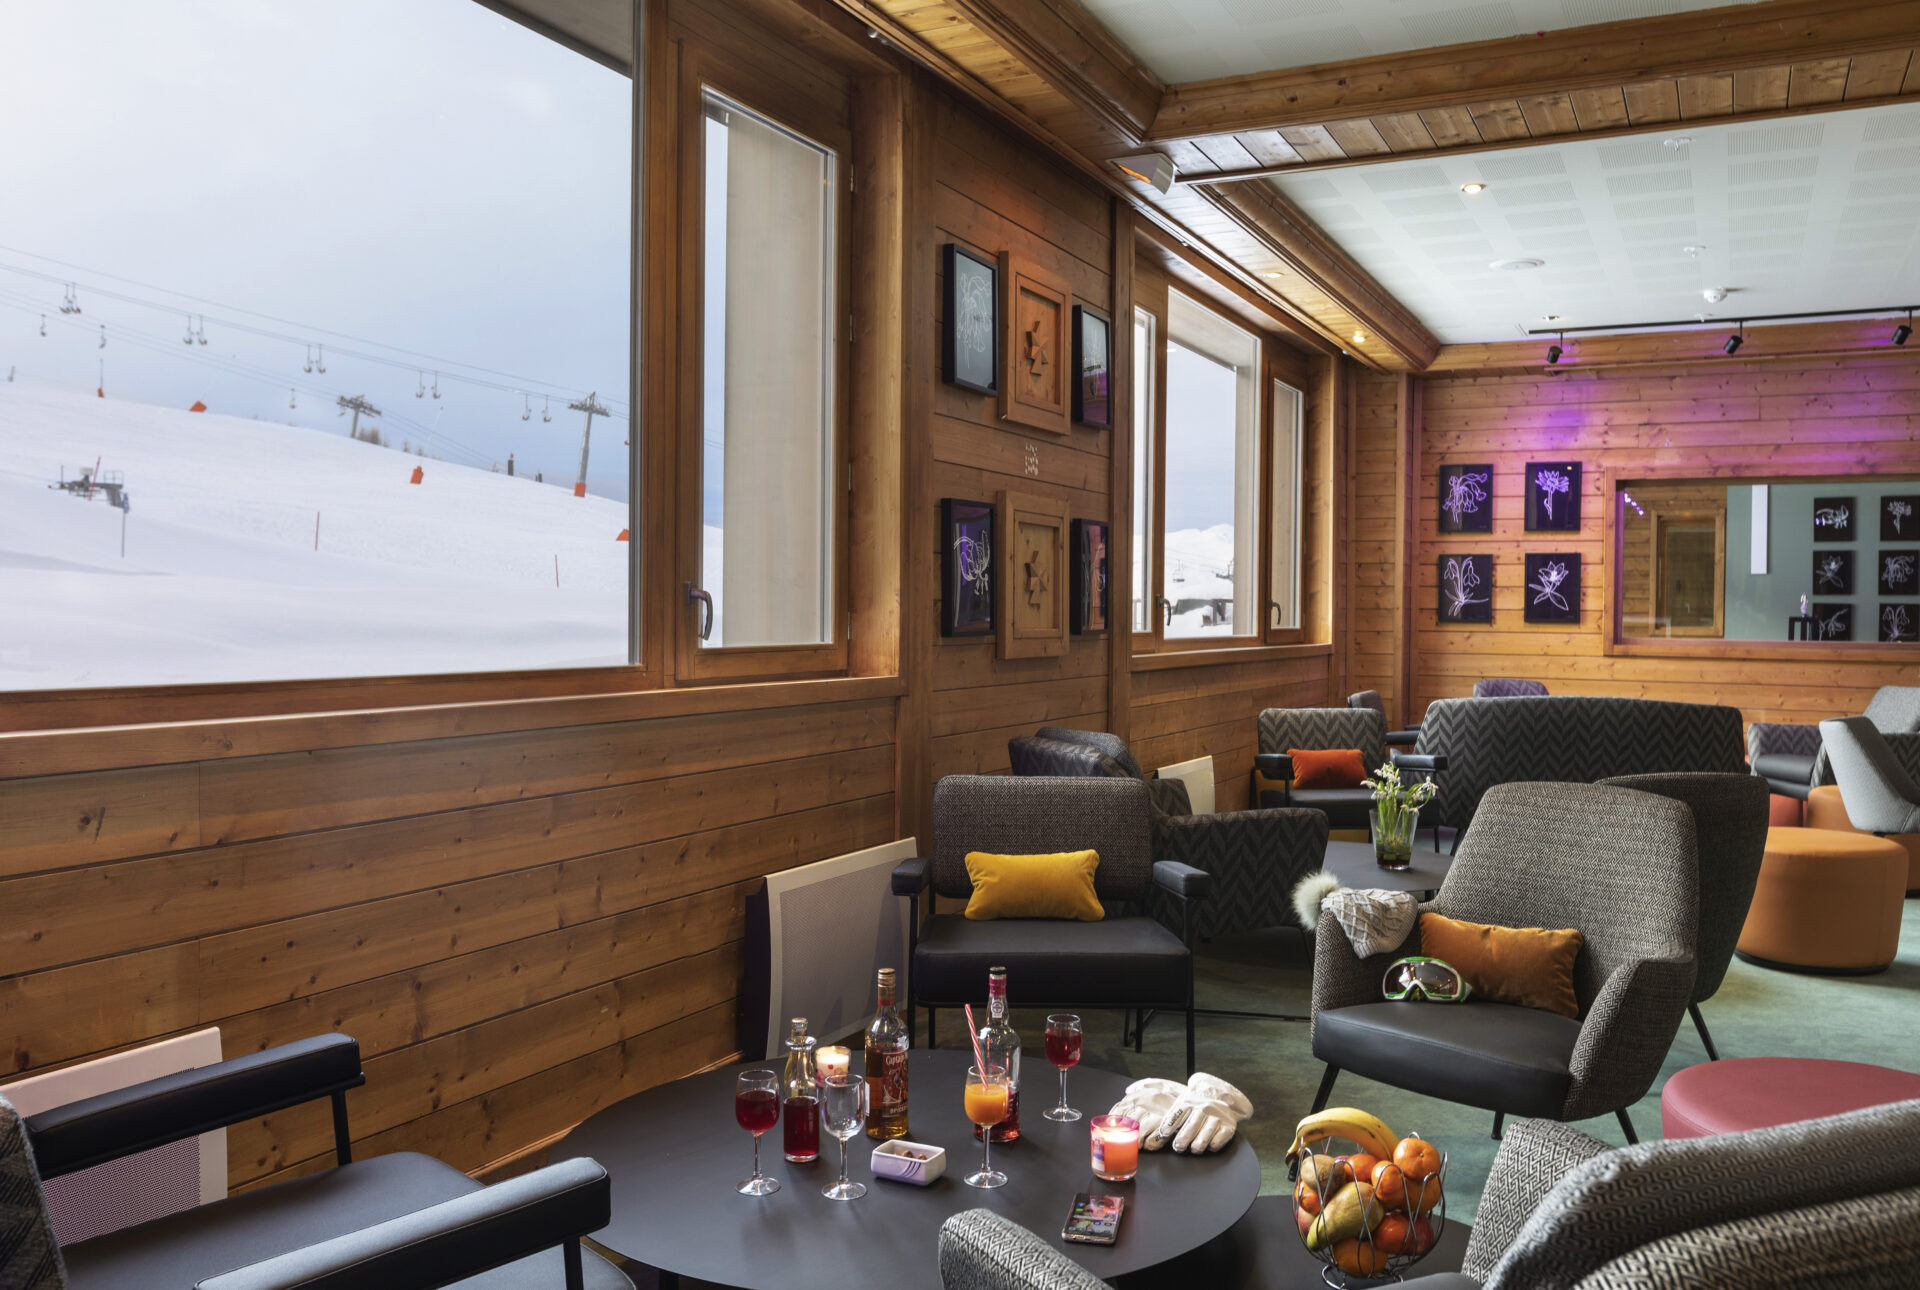 The seating in the lounge at MMV Plagne 2000